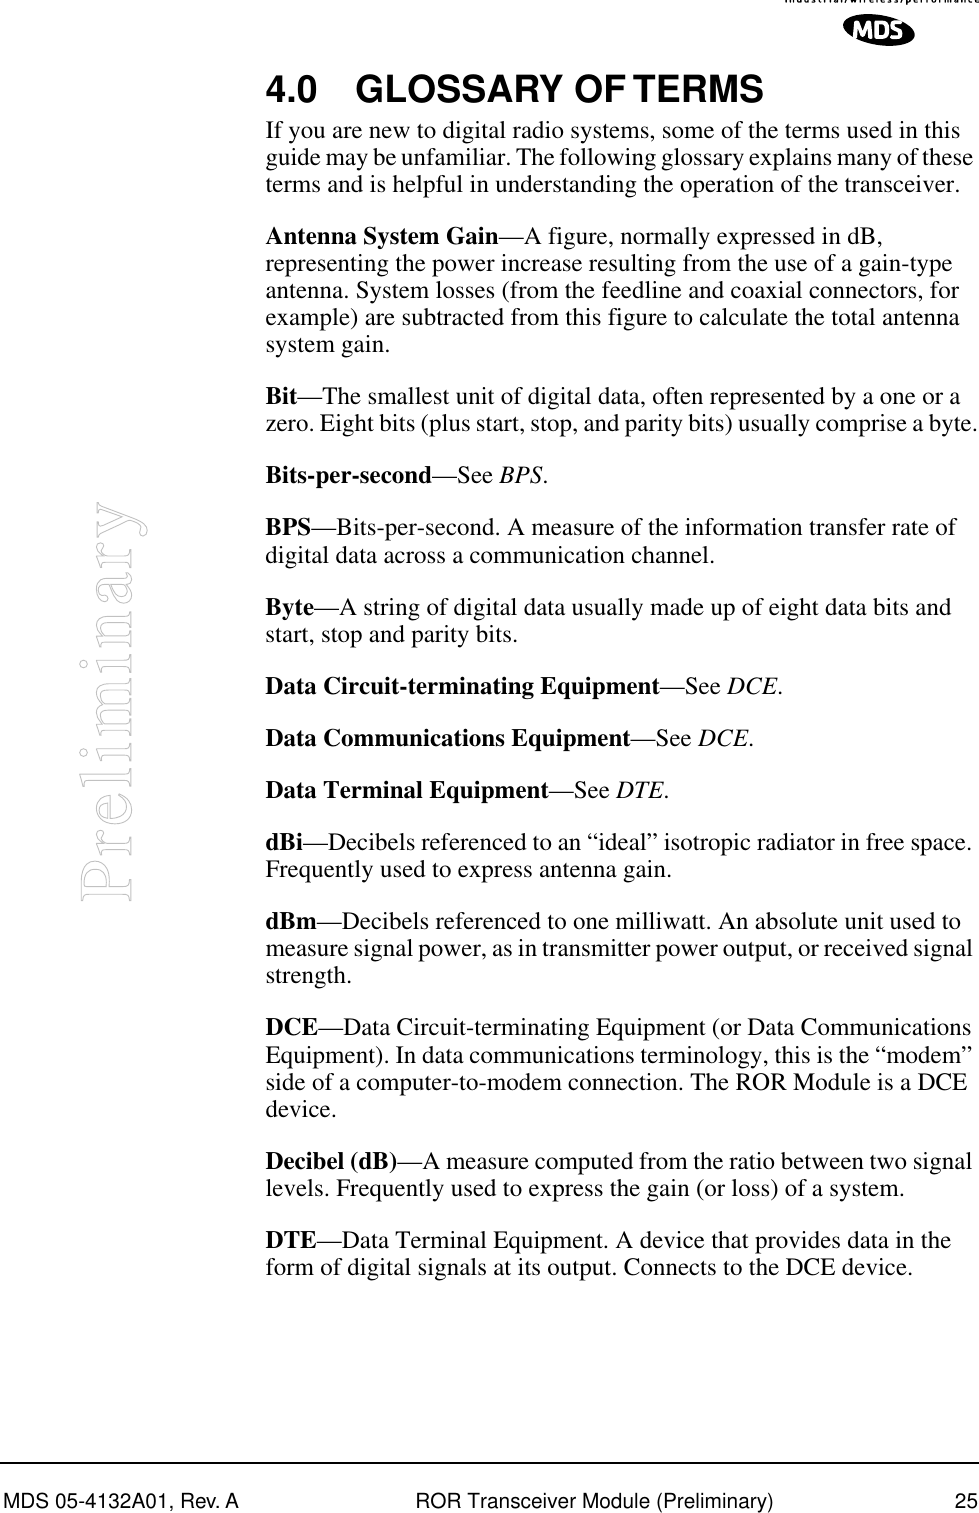 MDS 05-4132A01, Rev. A ROR Transceiver Module (Preliminary) 25Preliminary4.0 GLOSSARY OF TERMSIf you are new to digital radio systems, some of the terms used in this guide may be unfamiliar. The following glossary explains many of these terms and is helpful in understanding the operation of the transceiver.Antenna System Gain—A figure, normally expressed in dB, representing the power increase resulting from the use of a gain-type antenna. System losses (from the feedline and coaxial connectors, for example) are subtracted from this figure to calculate the total antenna system gain.Bit—The smallest unit of digital data, often represented by a one or a zero. Eight bits (plus start, stop, and parity bits) usually comprise a byte.Bits-per-second—See BPS.BPS—Bits-per-second. A measure of the information transfer rate of digital data across a communication channel.Byte—A string of digital data usually made up of eight data bits and start, stop and parity bits.Data Circuit-terminating Equipment—See DCE.Data Communications Equipment—See DCE.Data Terminal Equipment—See DTE.dBi—Decibels referenced to an “ideal” isotropic radiator in free space. Frequently used to express antenna gain.dBm—Decibels referenced to one milliwatt. An absolute unit used to measure signal power, as in transmitter power output, or received signal strength.DCE—Data Circuit-terminating Equipment (or Data Communications Equipment). In data communications terminology, this is the “modem” side of a computer-to-modem connection. The ROR Module is a DCE device.Decibel (dB)—A measure computed from the ratio between two signal levels. Frequently used to express the gain (or loss) of a system.DTE—Data Terminal Equipment. A device that provides data in the form of digital signals at its output. Connects to the DCE device.